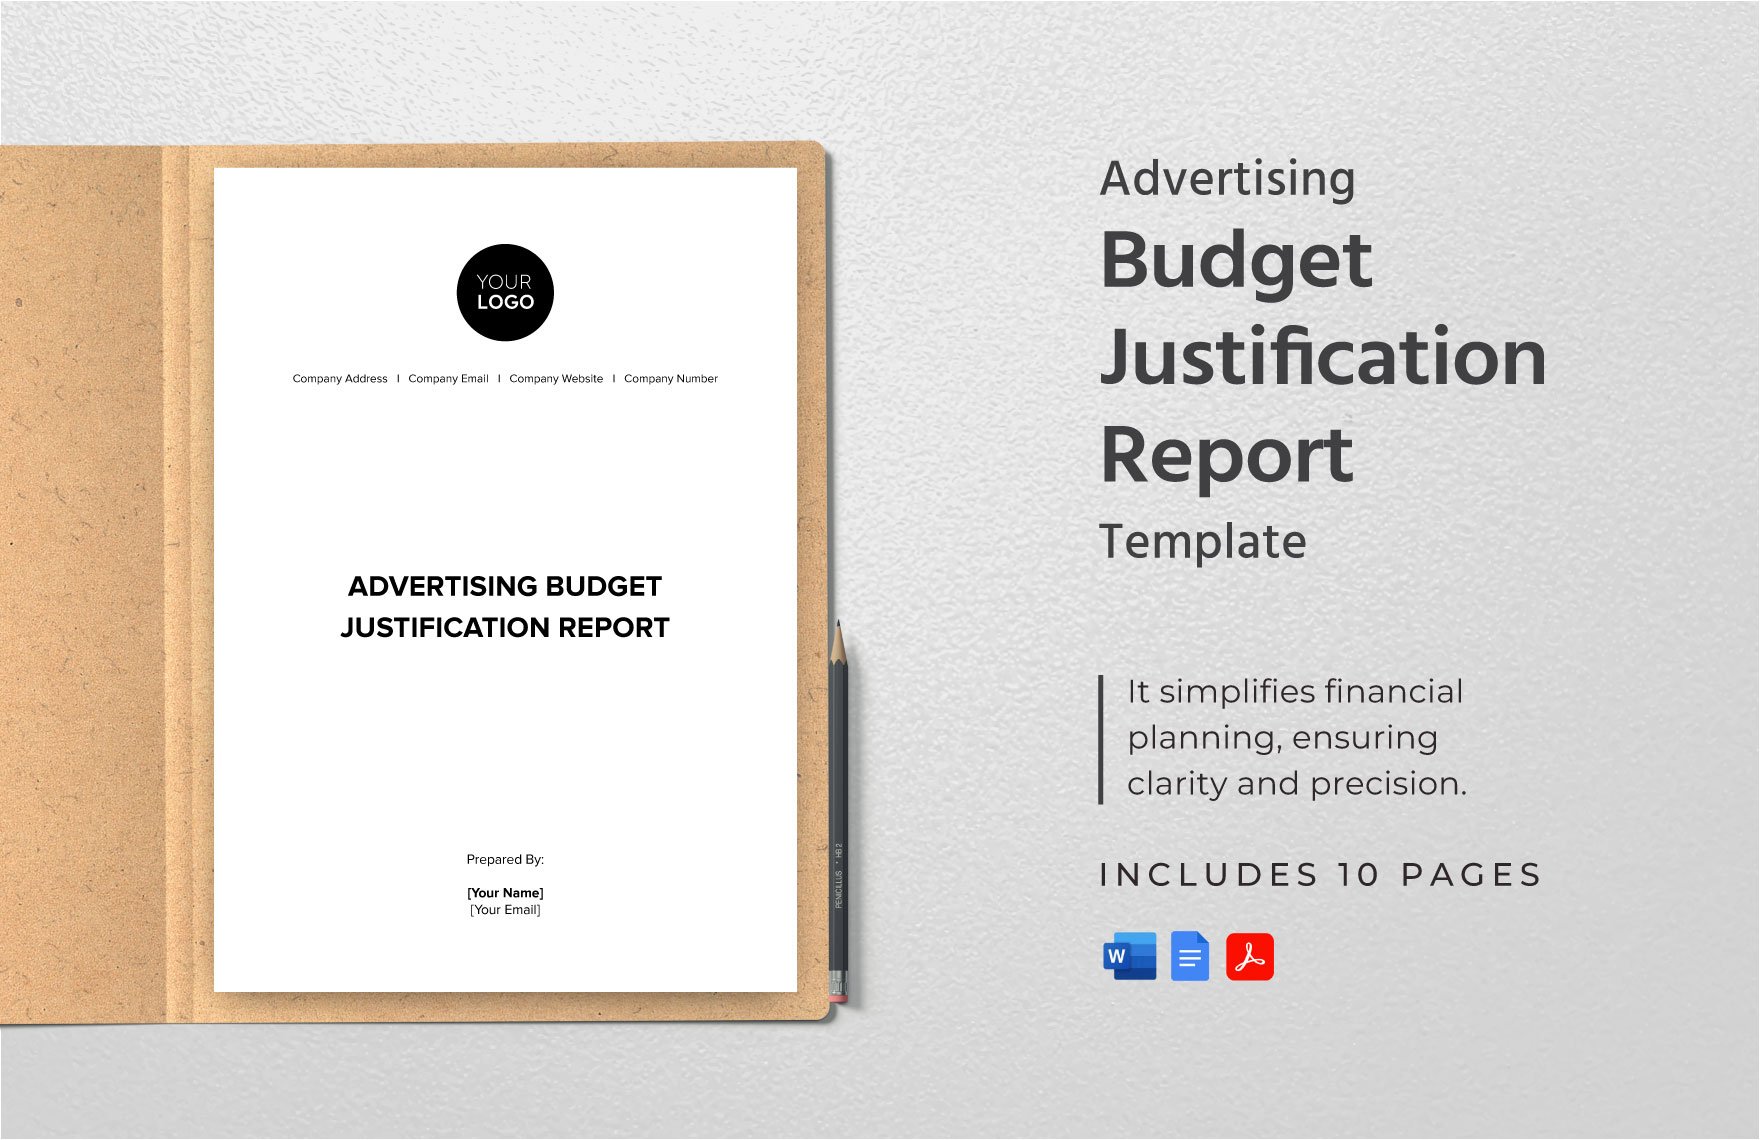 Advertising Budget Justification Report Template in Word, Google Docs, PDF